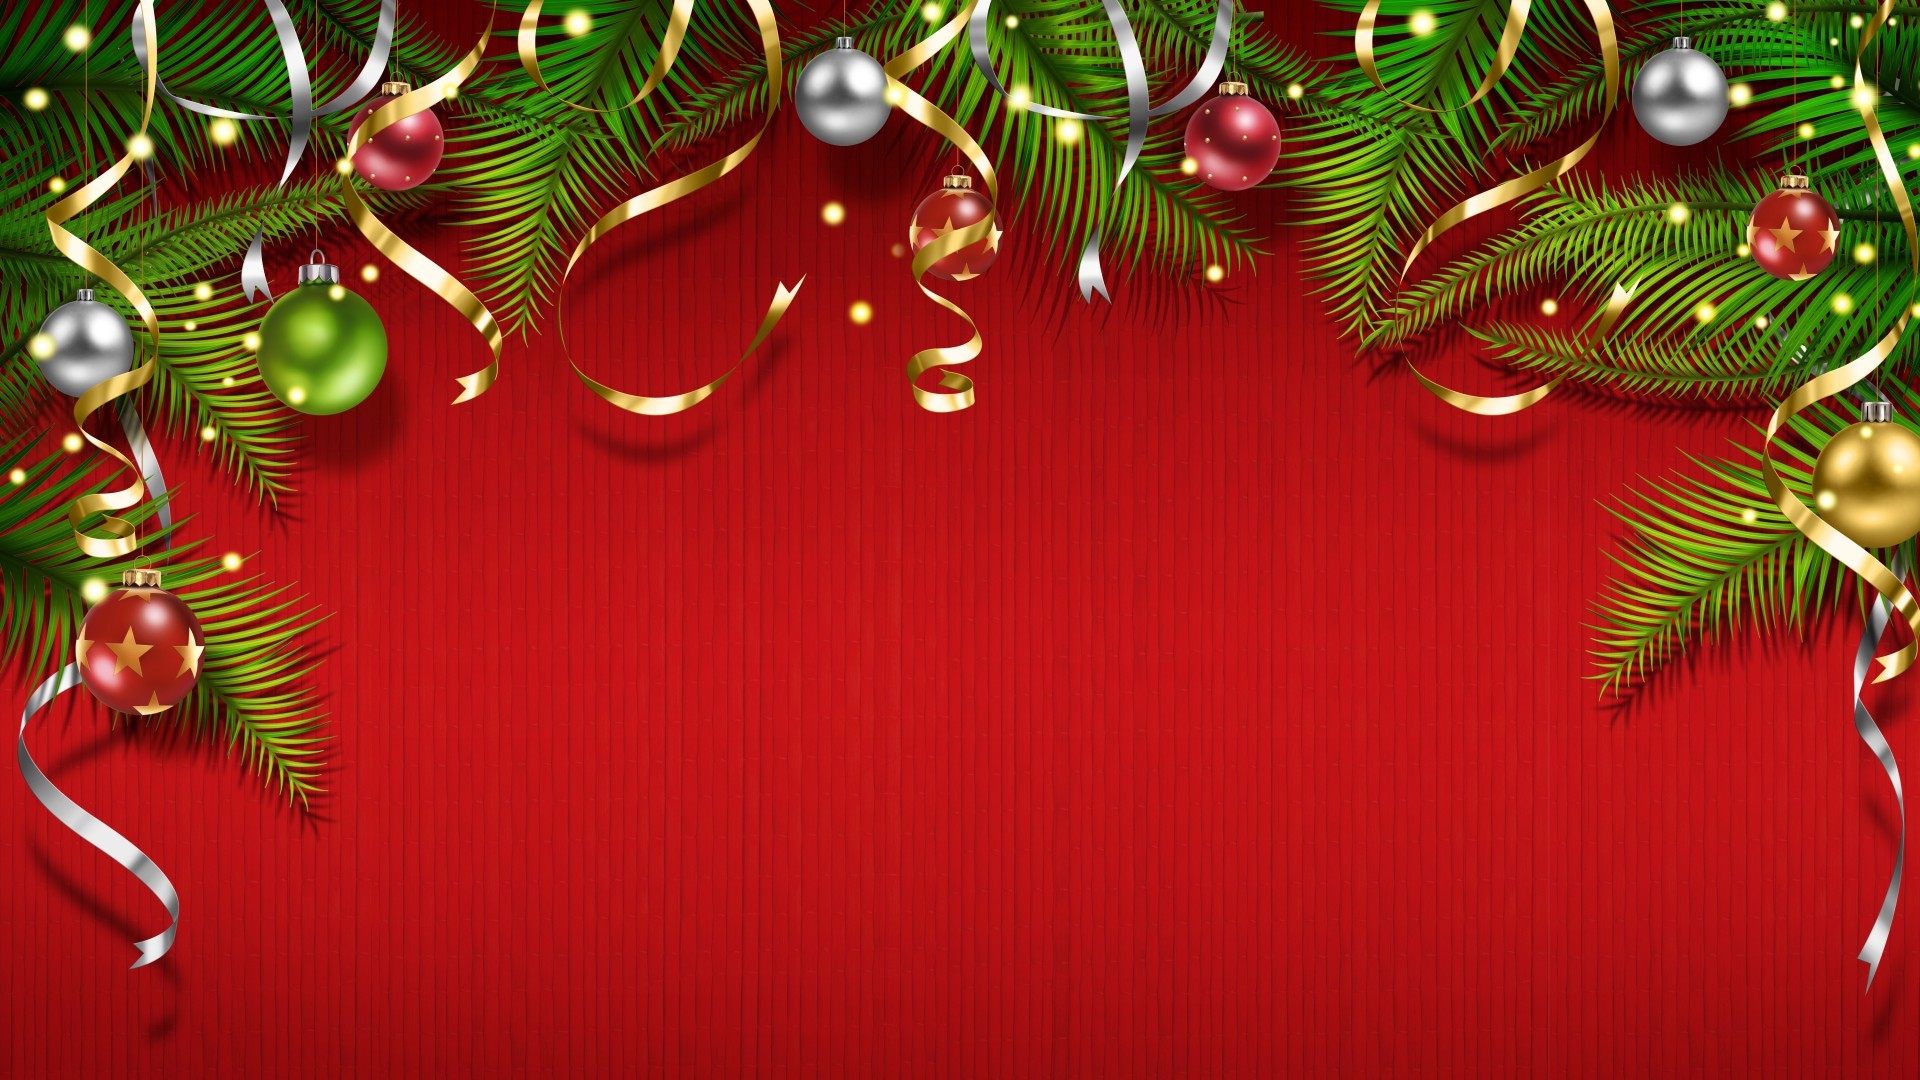 1920x1080 Download Christmas Wallpapers HD.